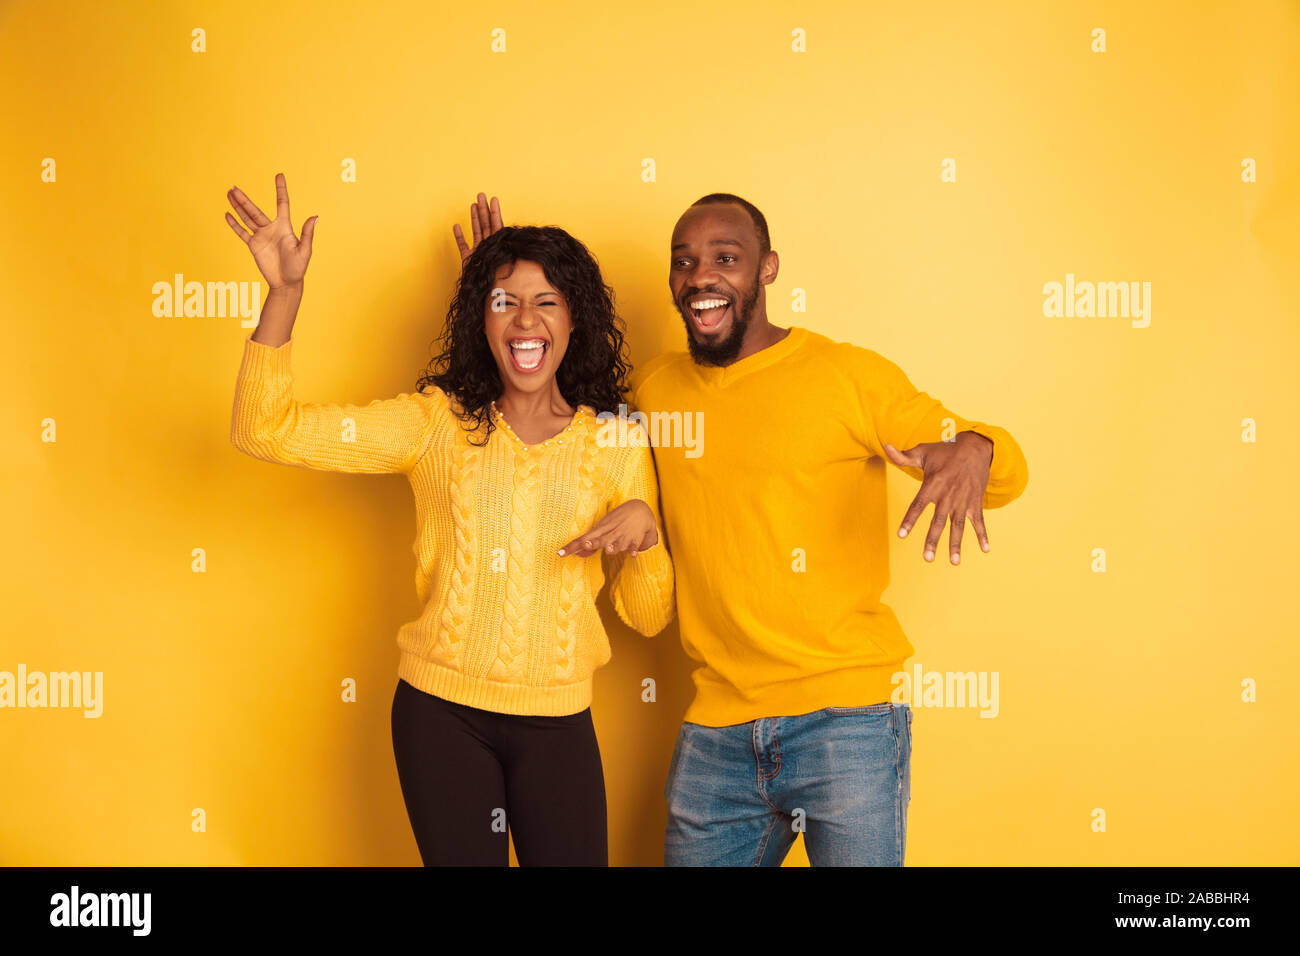 Young emotional african-american man and woman in bright casual clothes on yellow background. Beautiful couple. Concept of human emotions, facial expession, relations, ad. Dancing and singing. Stock Photo